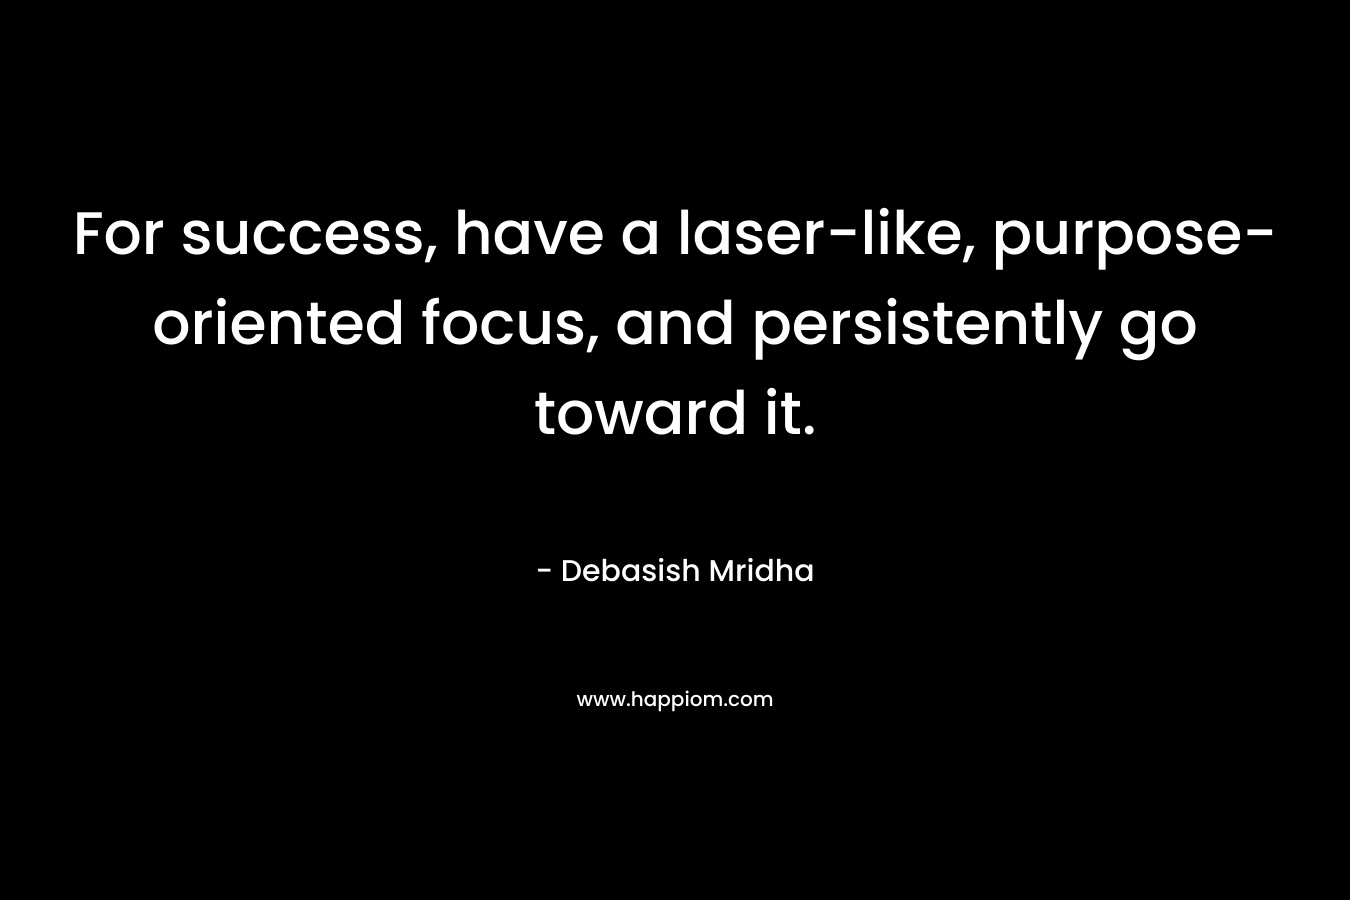 For success, have a laser-like, purpose-oriented focus, and persistently go toward it.